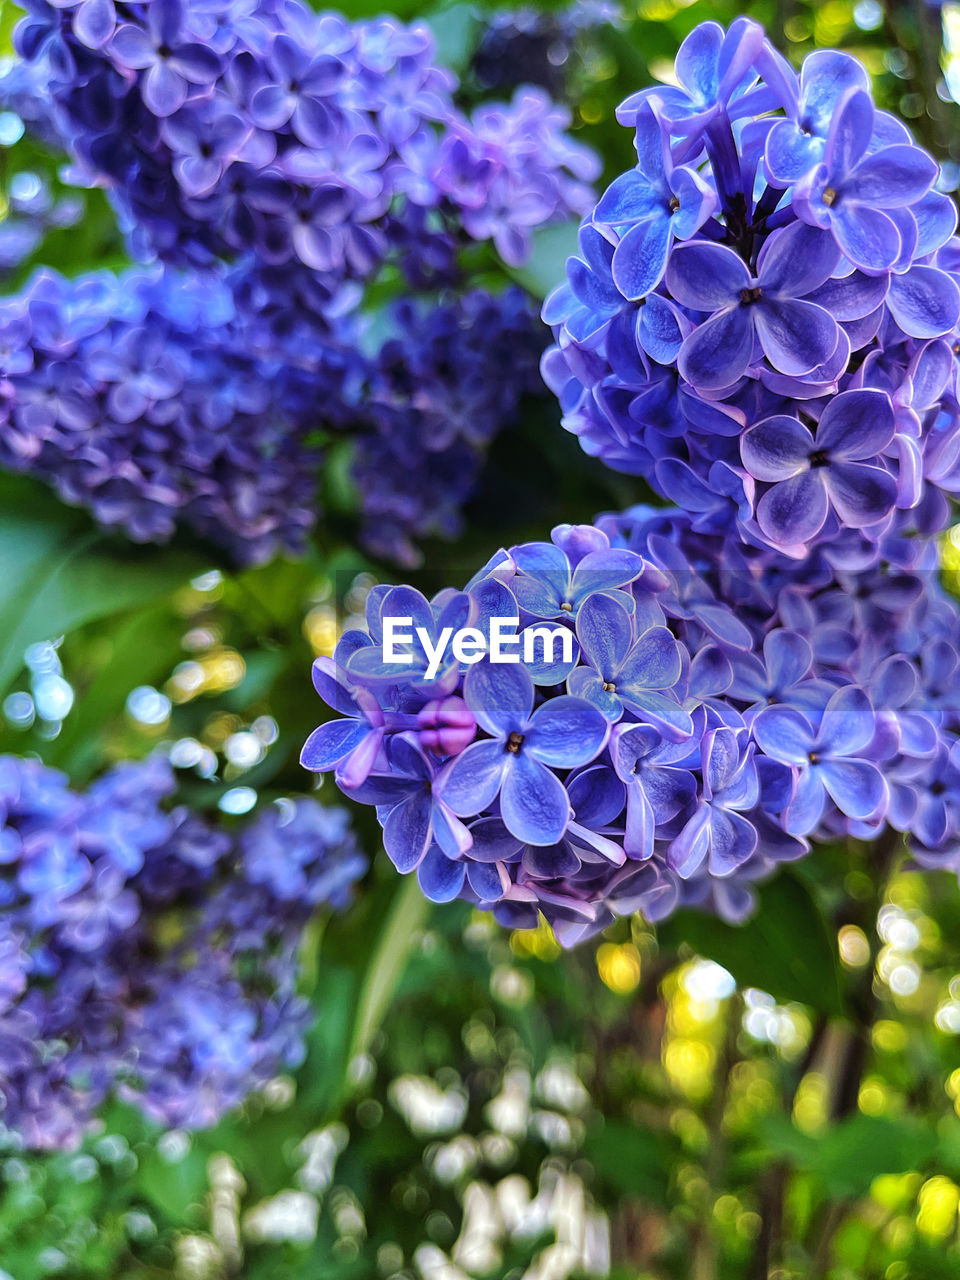 plant, flower, flowering plant, purple, beauty in nature, freshness, growth, fragility, close-up, nature, lilac, petal, inflorescence, flower head, no people, hydrangea, blue, day, springtime, focus on foreground, plant part, outdoors, leaf, botany, blossom, garden, bunch of flowers